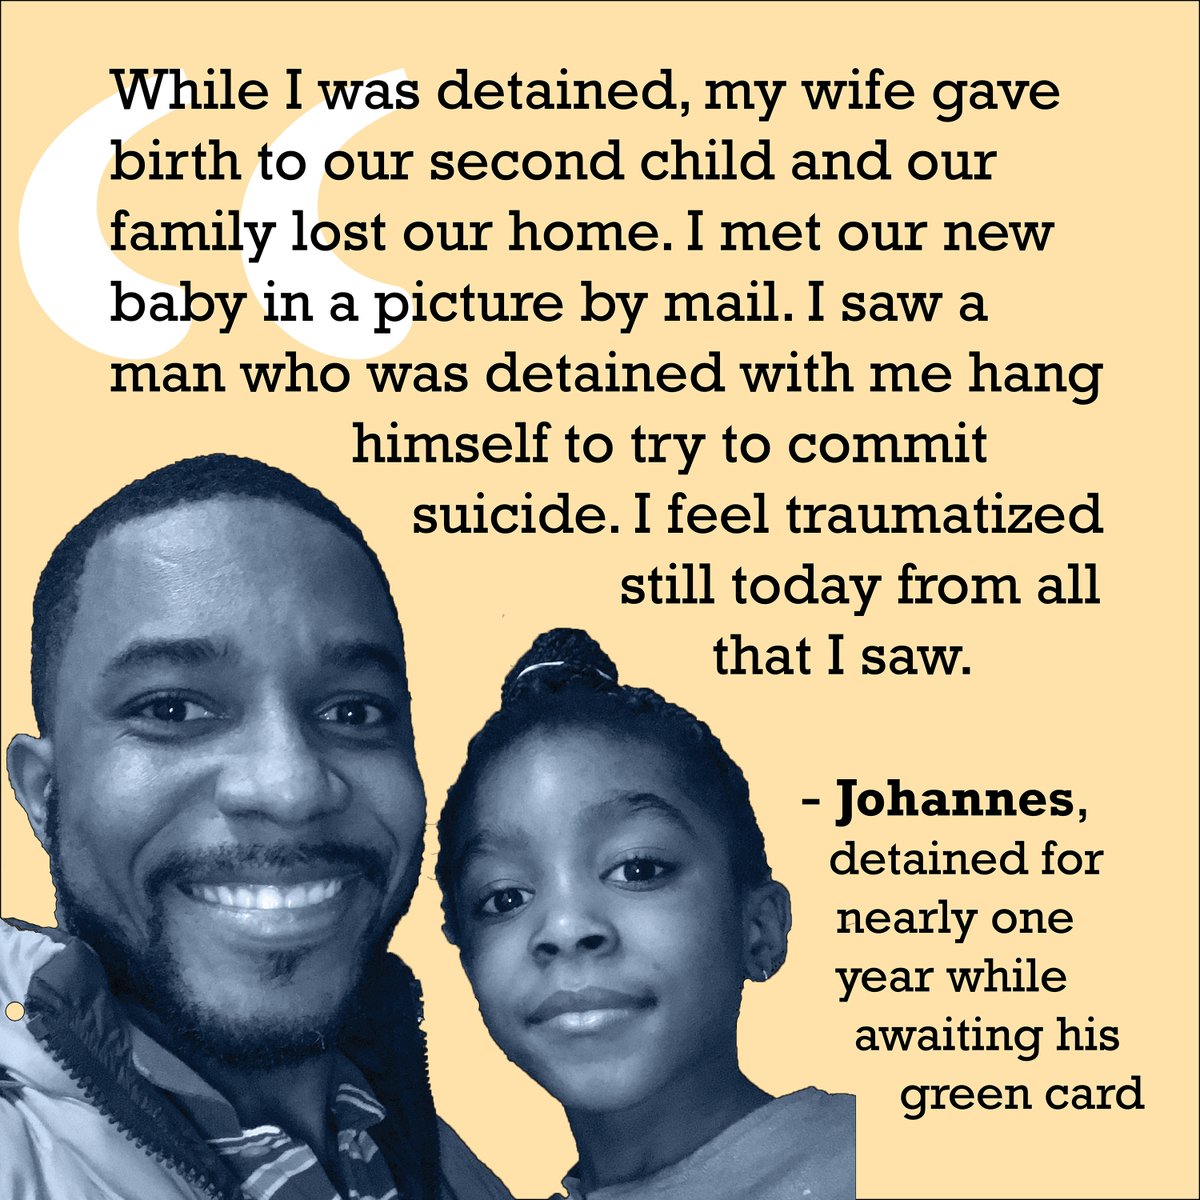 Johannes is one of NIJC’s many clients who have had their lives disrupted by needless ICE detention, when he spent almost a year incarcerated while waiting for his green card